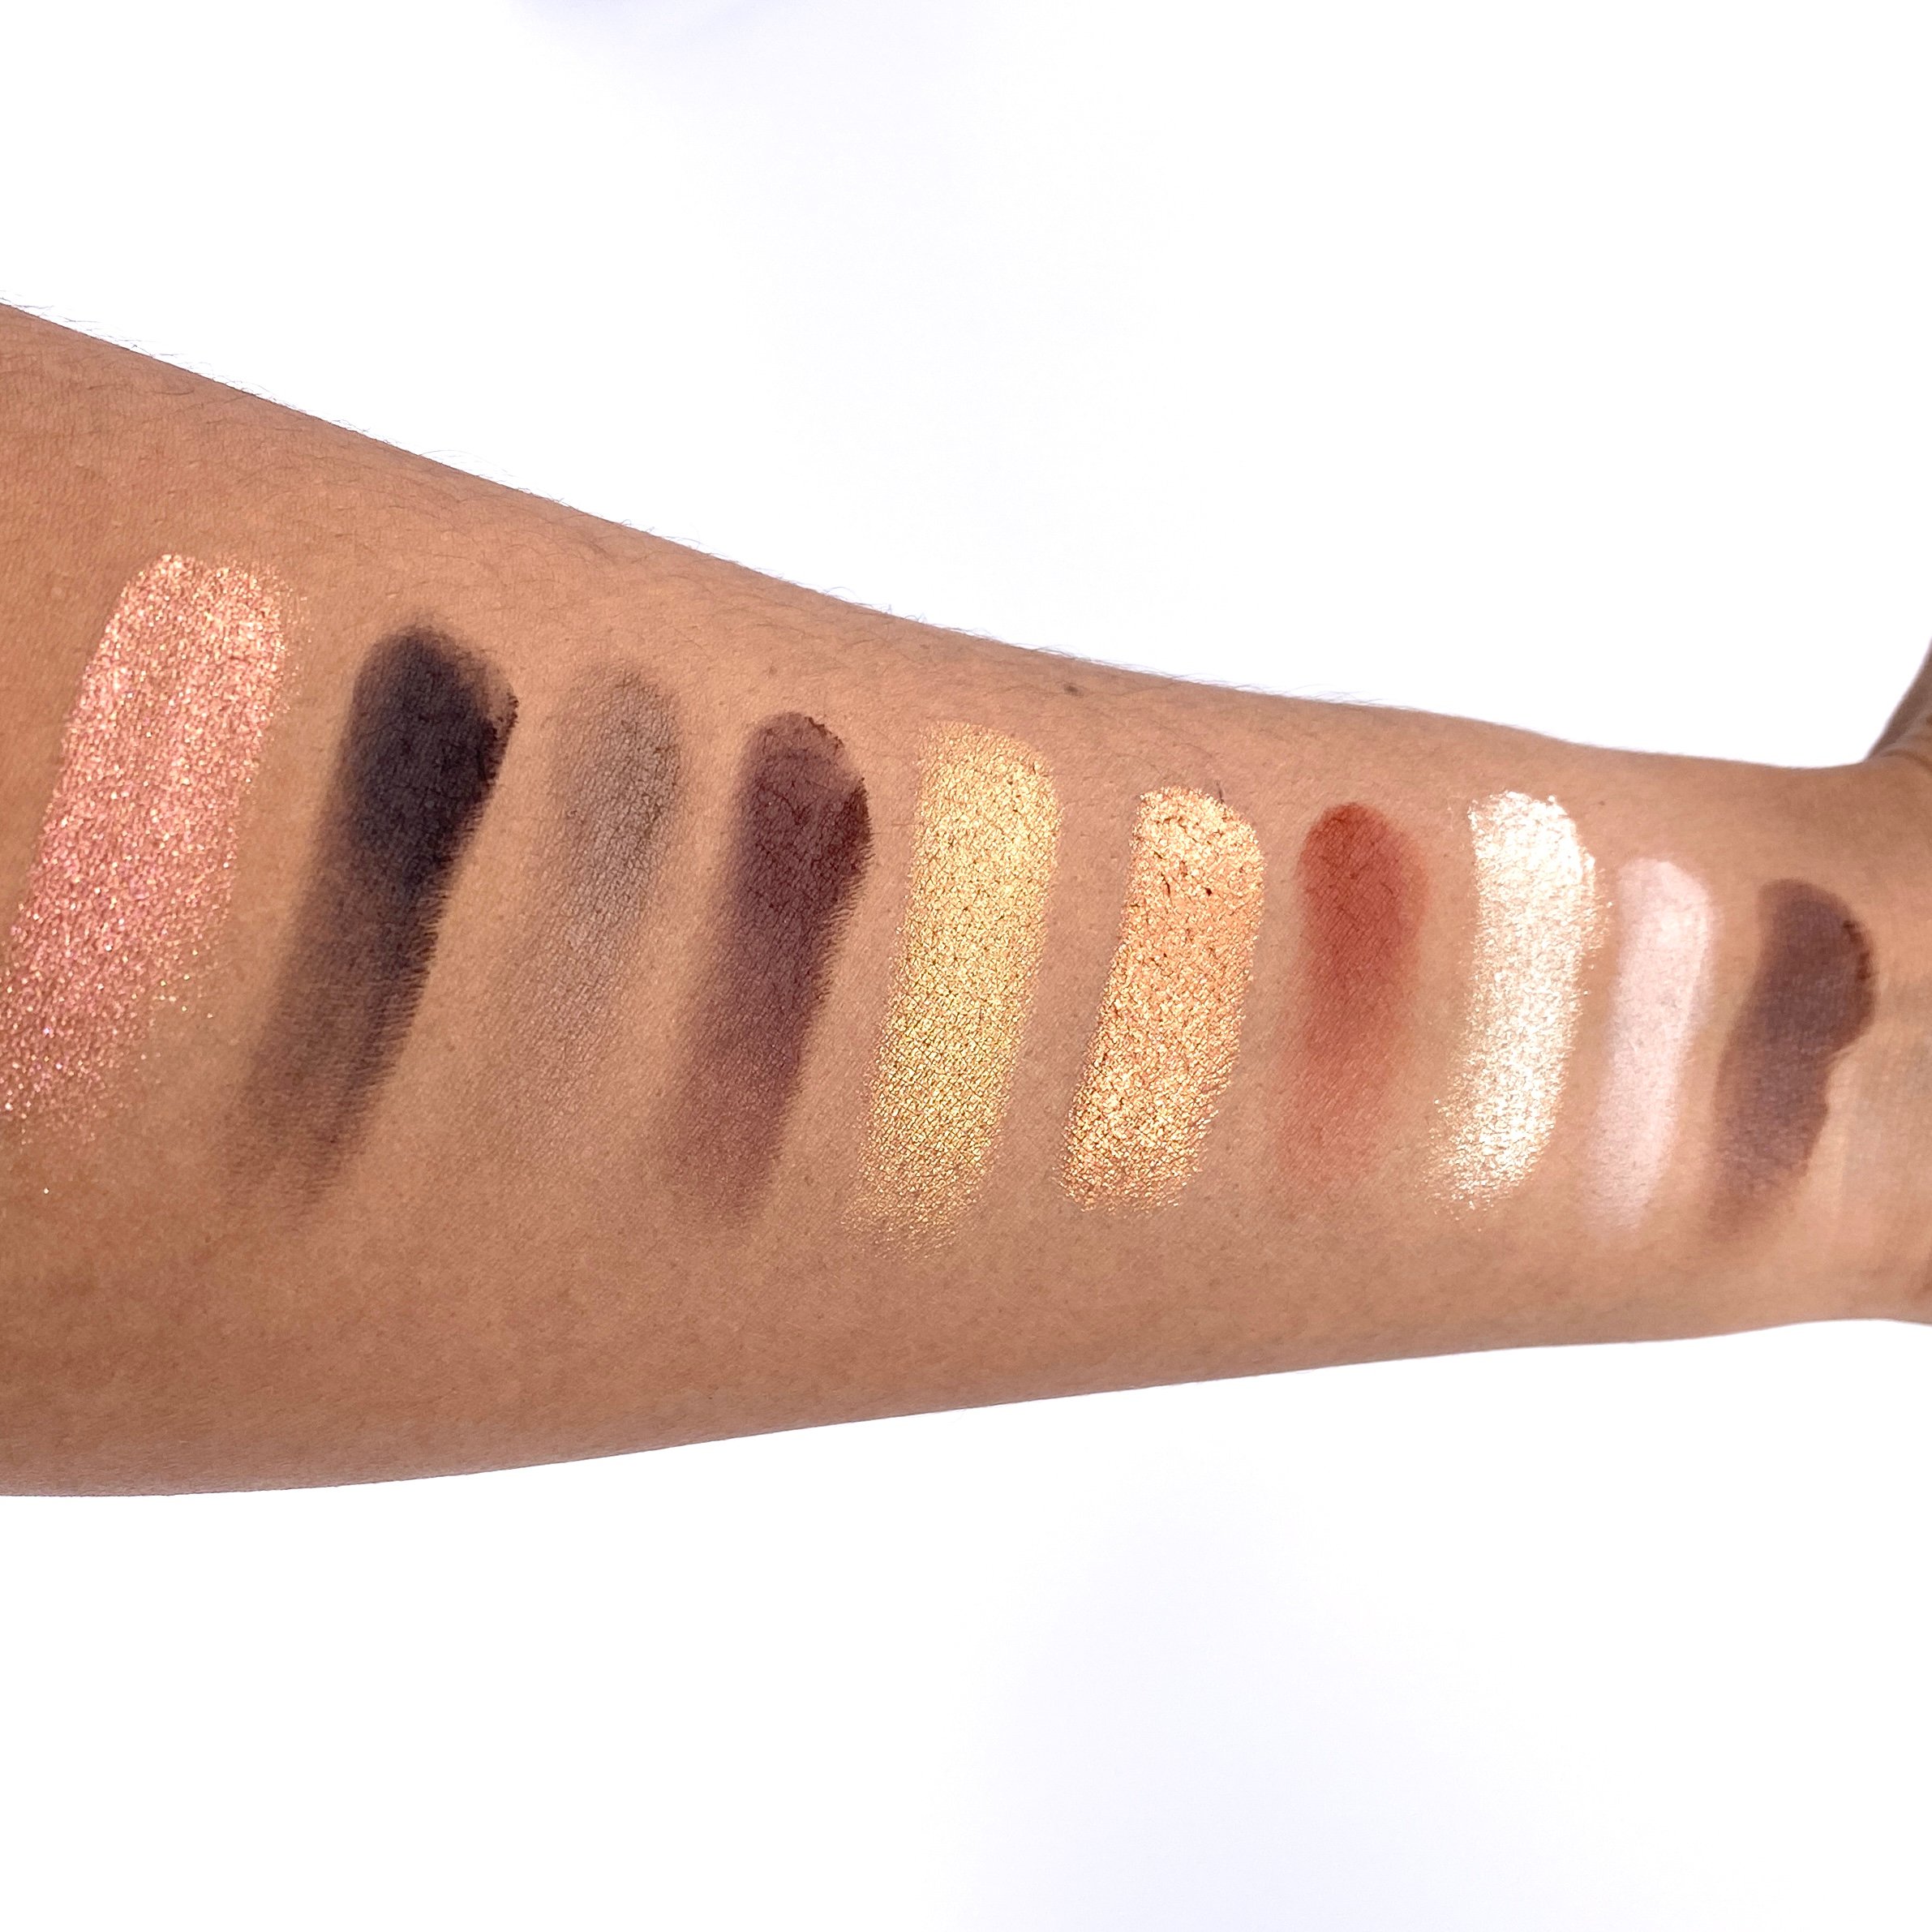 Moira Cosmetics Fairytale Shadow Palette Swatches for The Beem Box January 2021